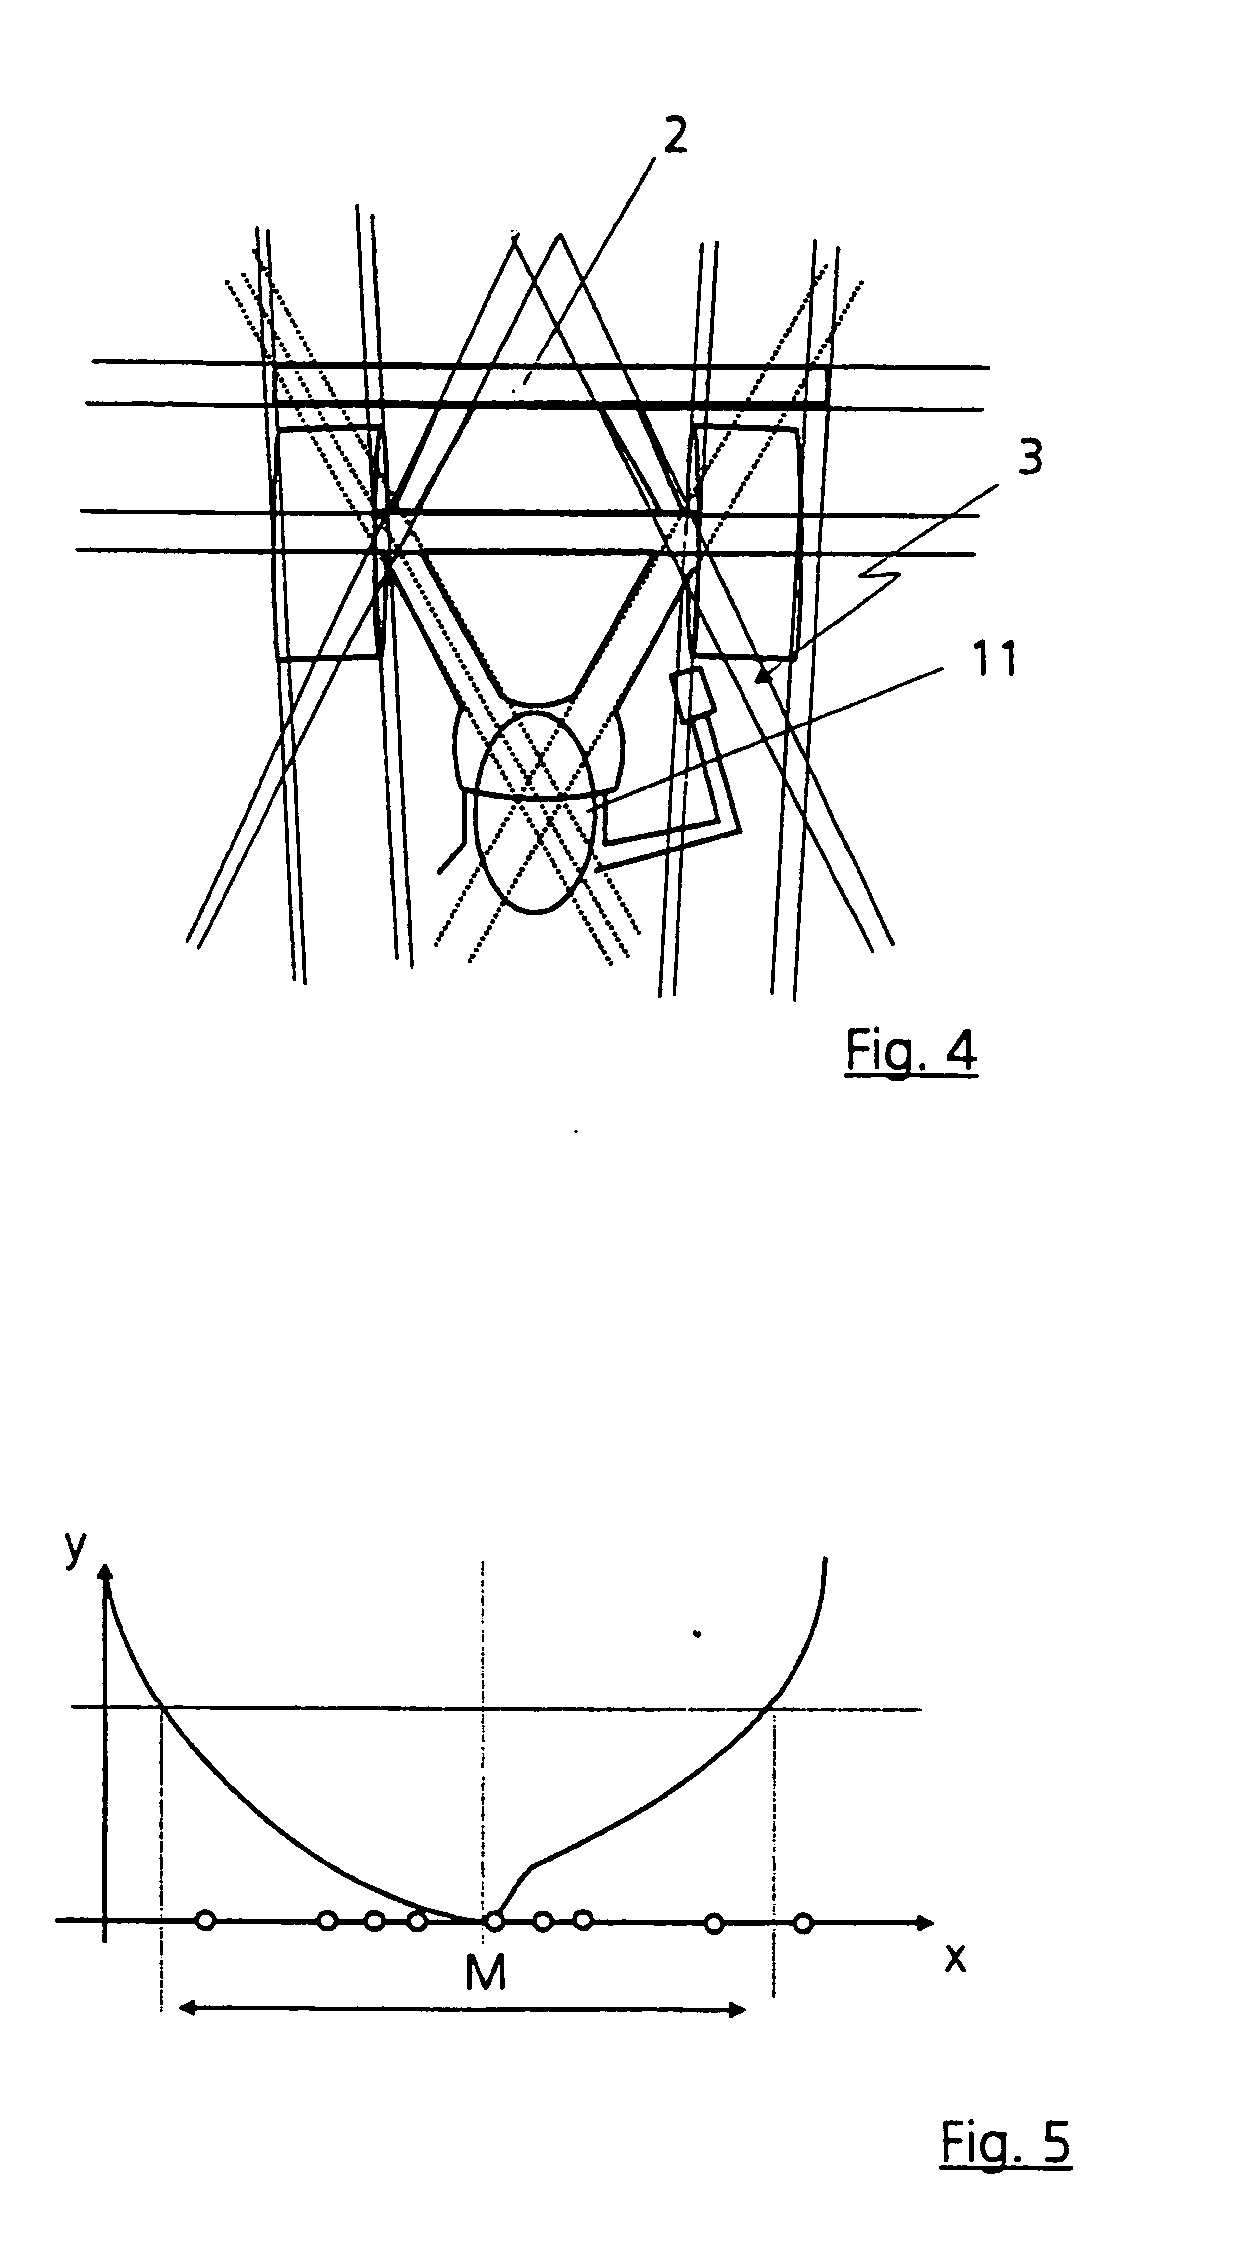 System for hitching a trailer to a motor vehicle